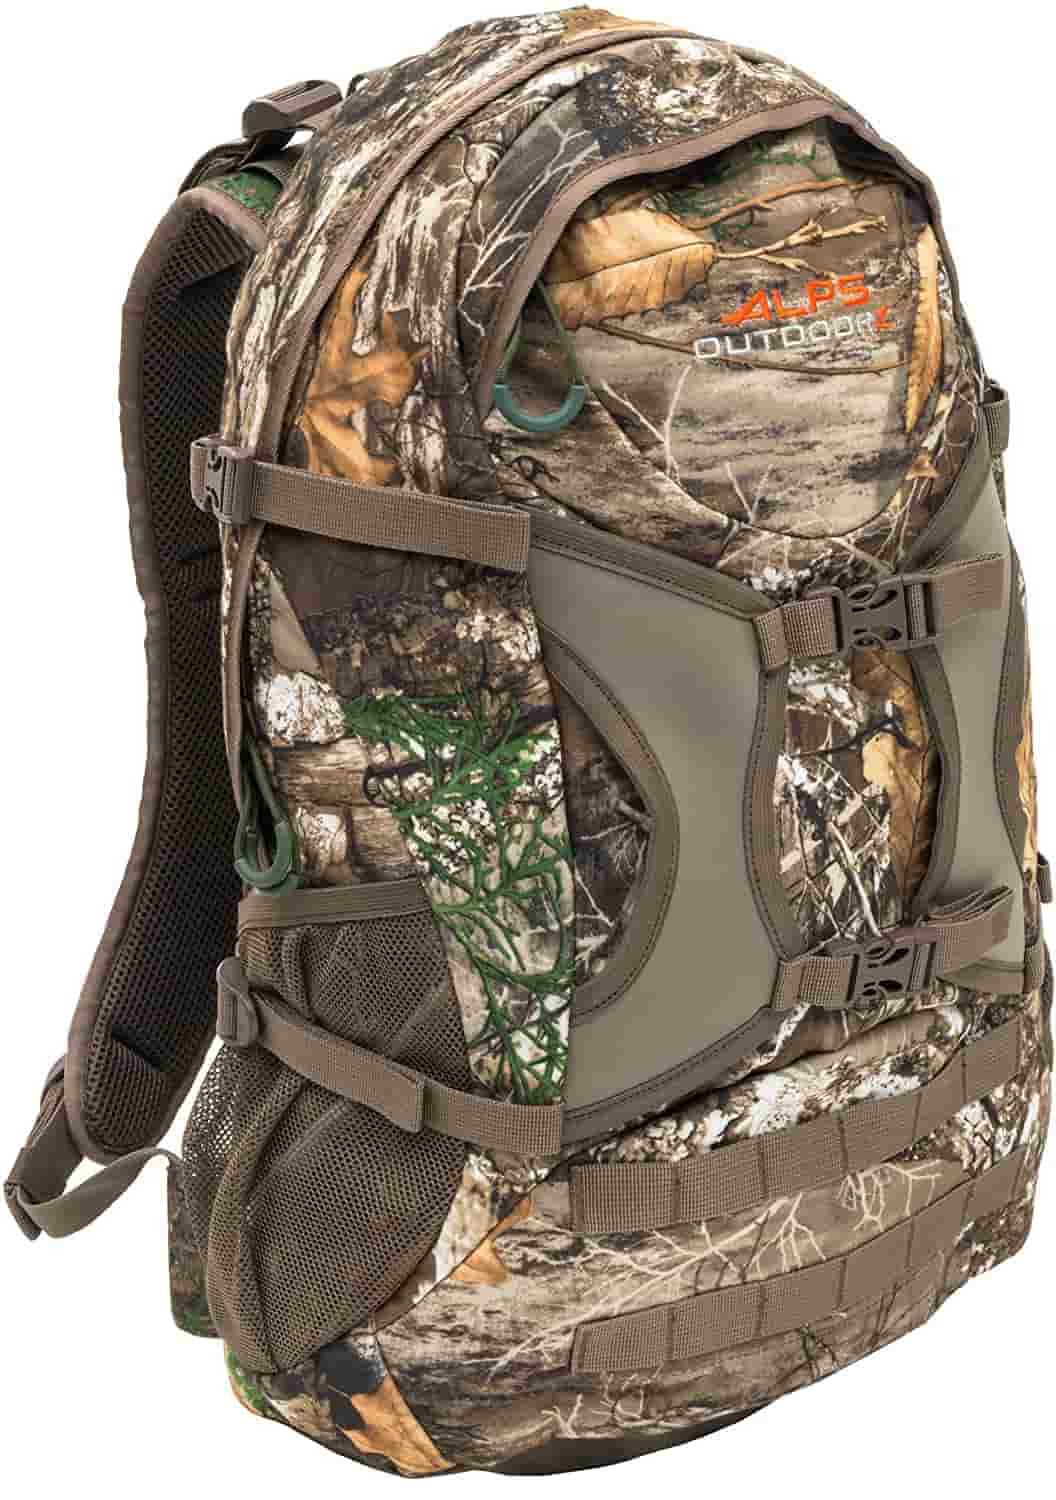 ALPS OutdoorZ Trail Blazer Hunting Pack